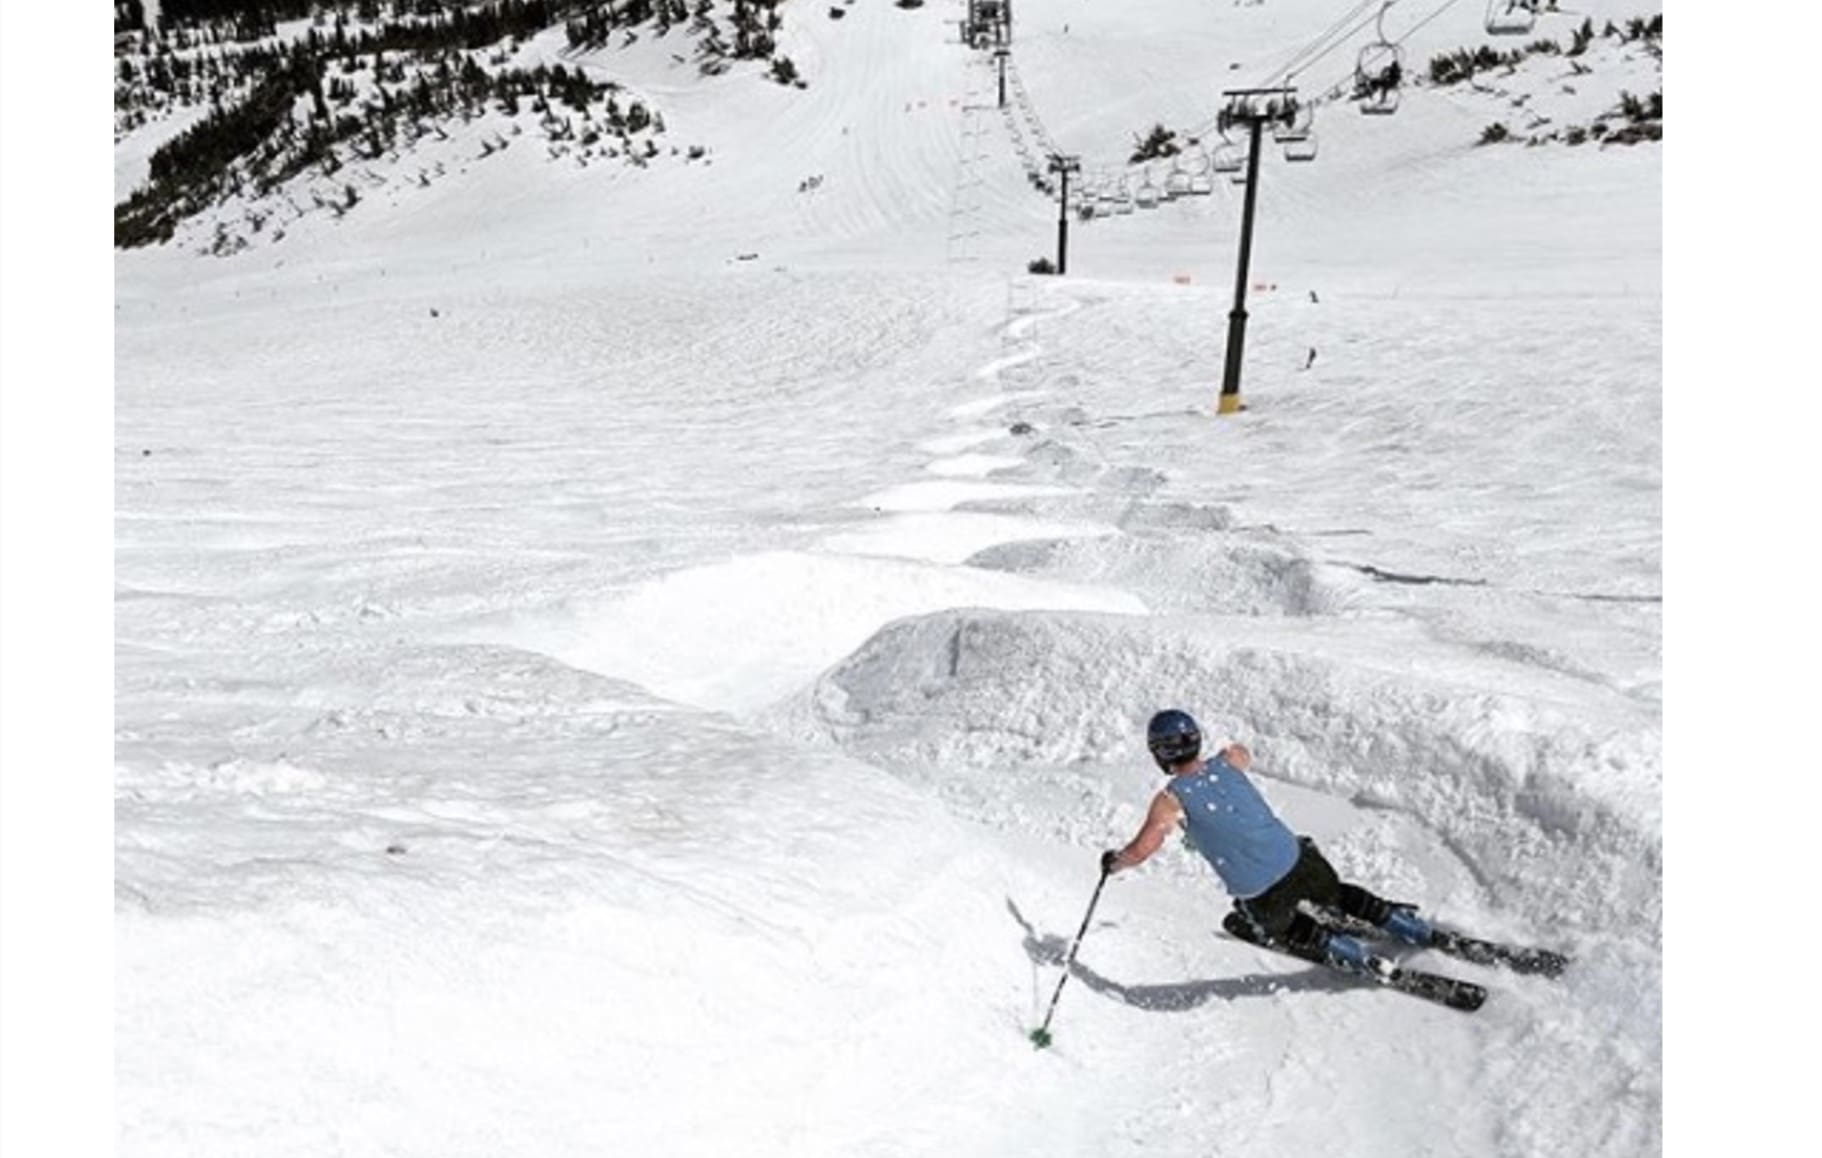 Mammoth Mountain Announced Final Closing Day (Sunday July 28th)